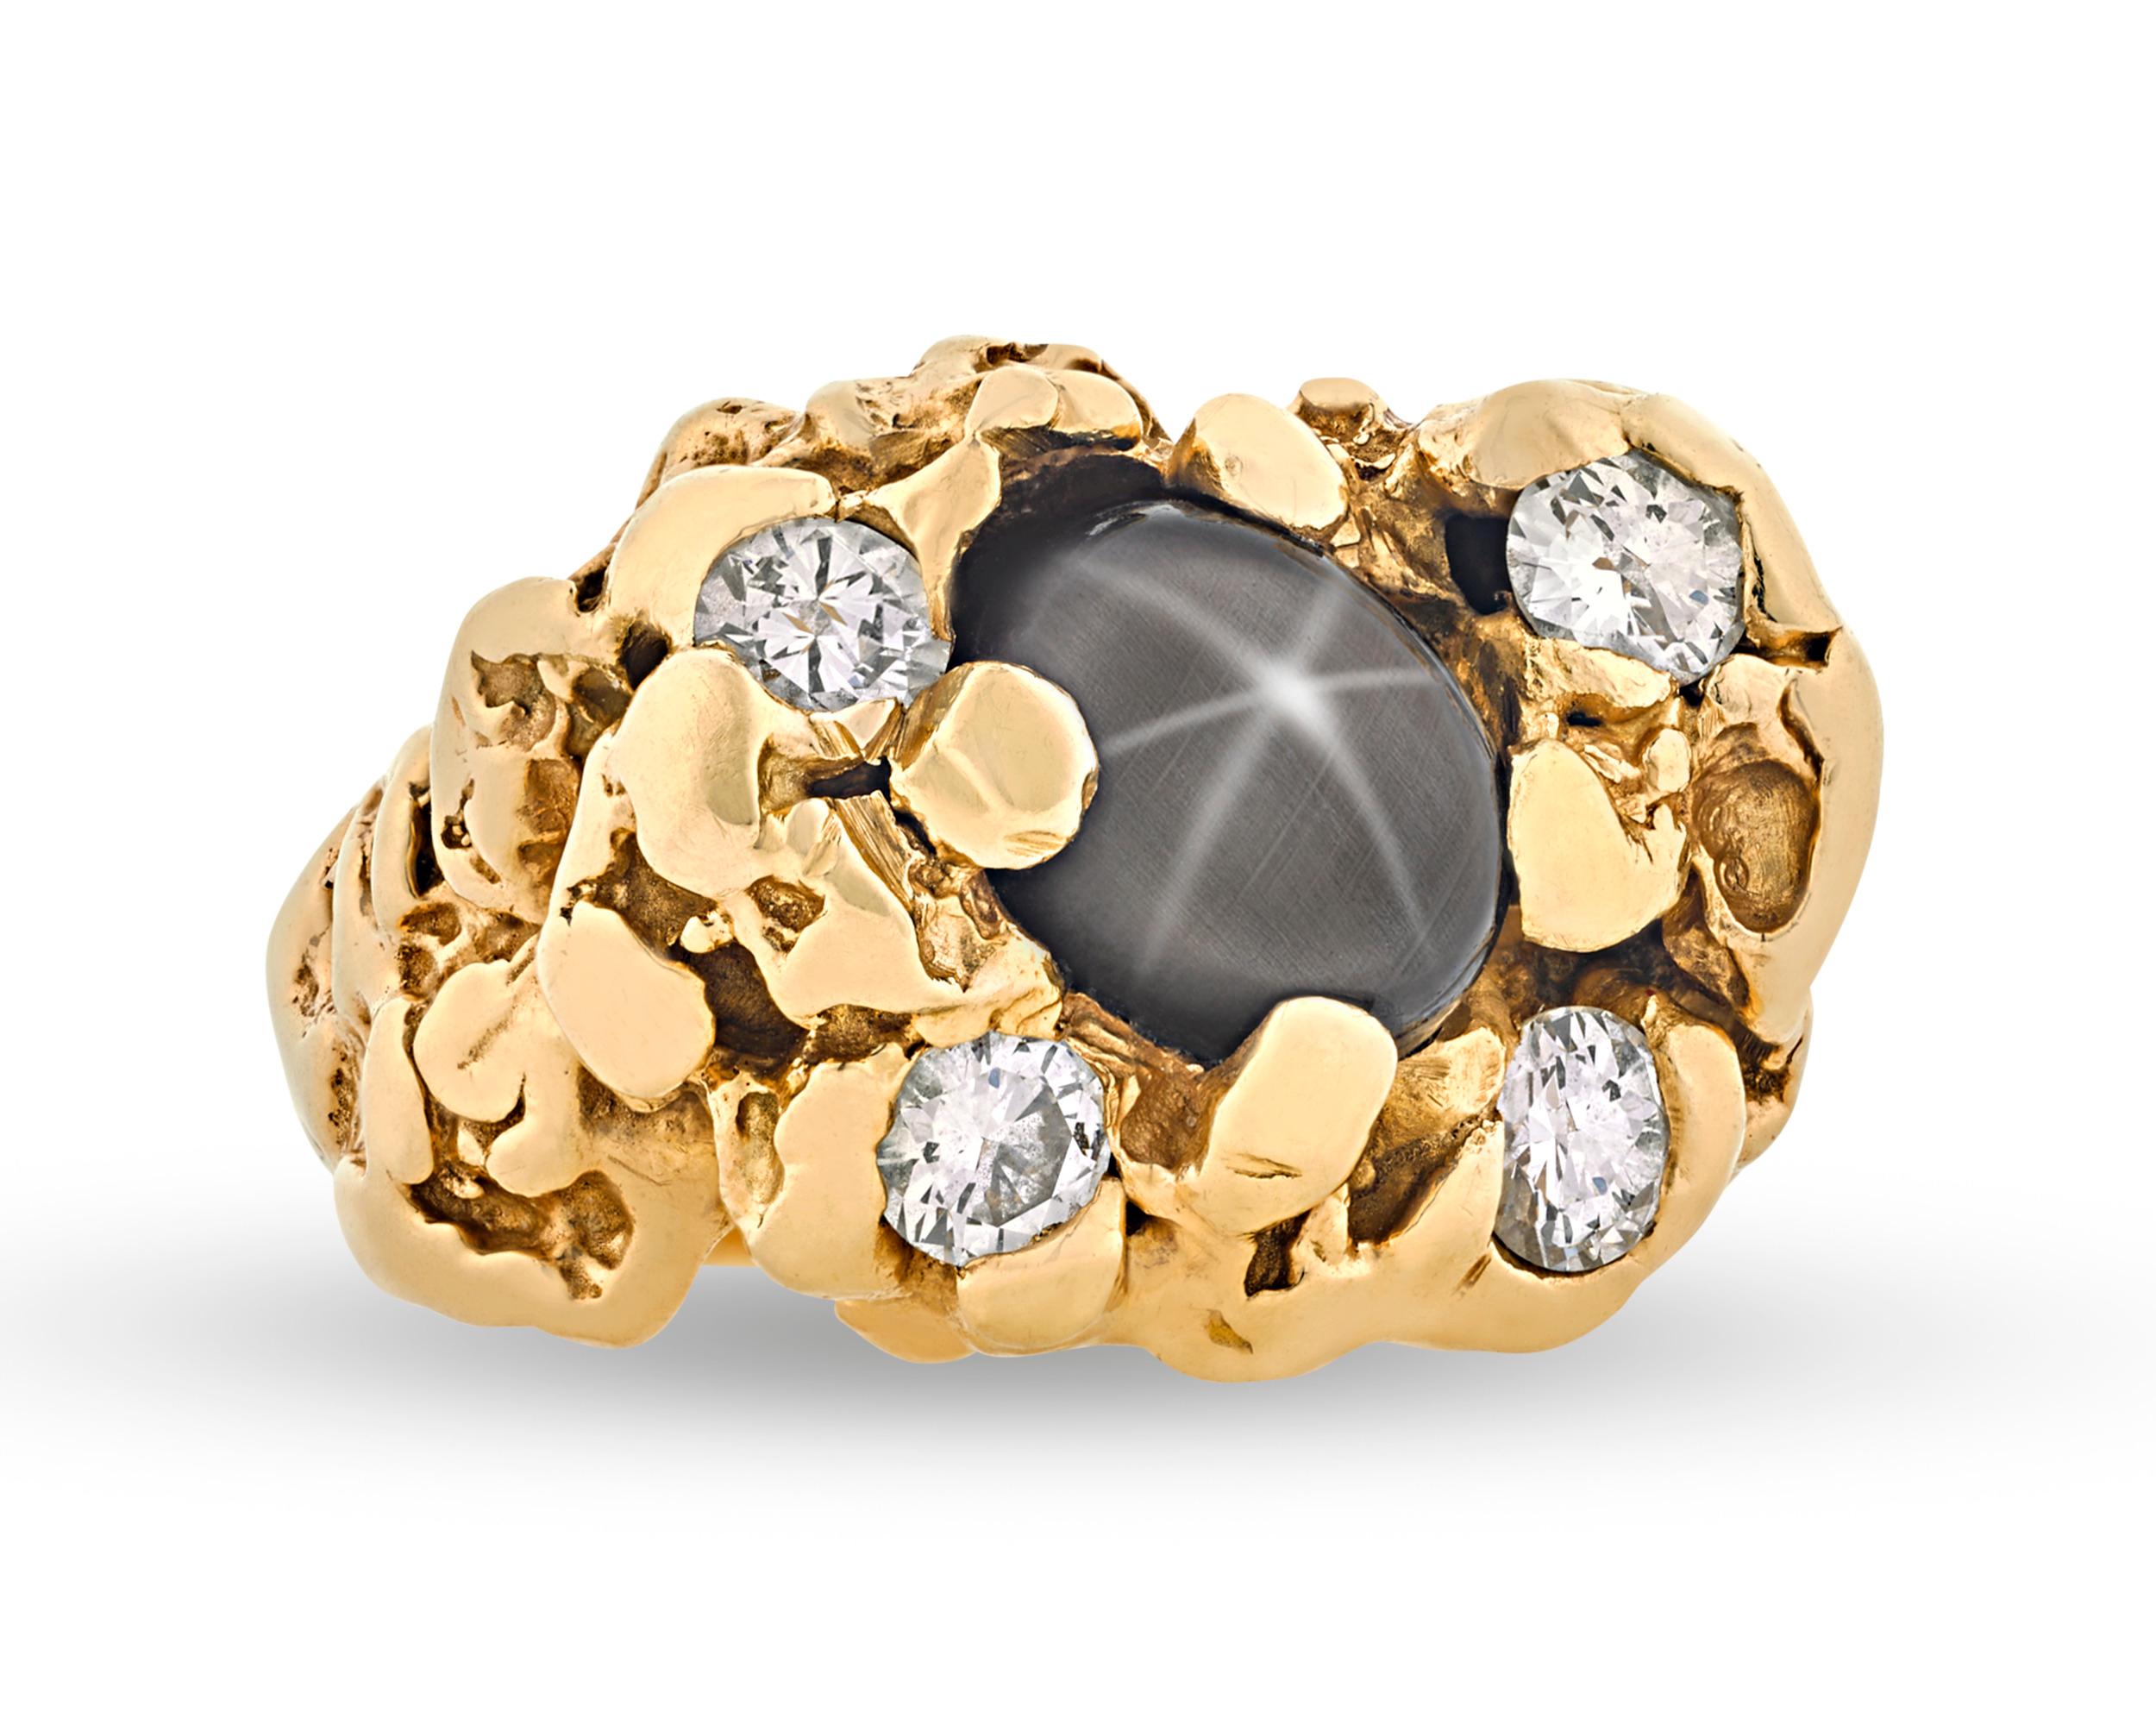 This ring was once owned and worn by one of the most celebrated cultural icons of the 20th century, Elvis Presley. Crafted from hammered 14K yellow gold, the impressive ring's highly sculptural form is inset with four white diamond accents. At the